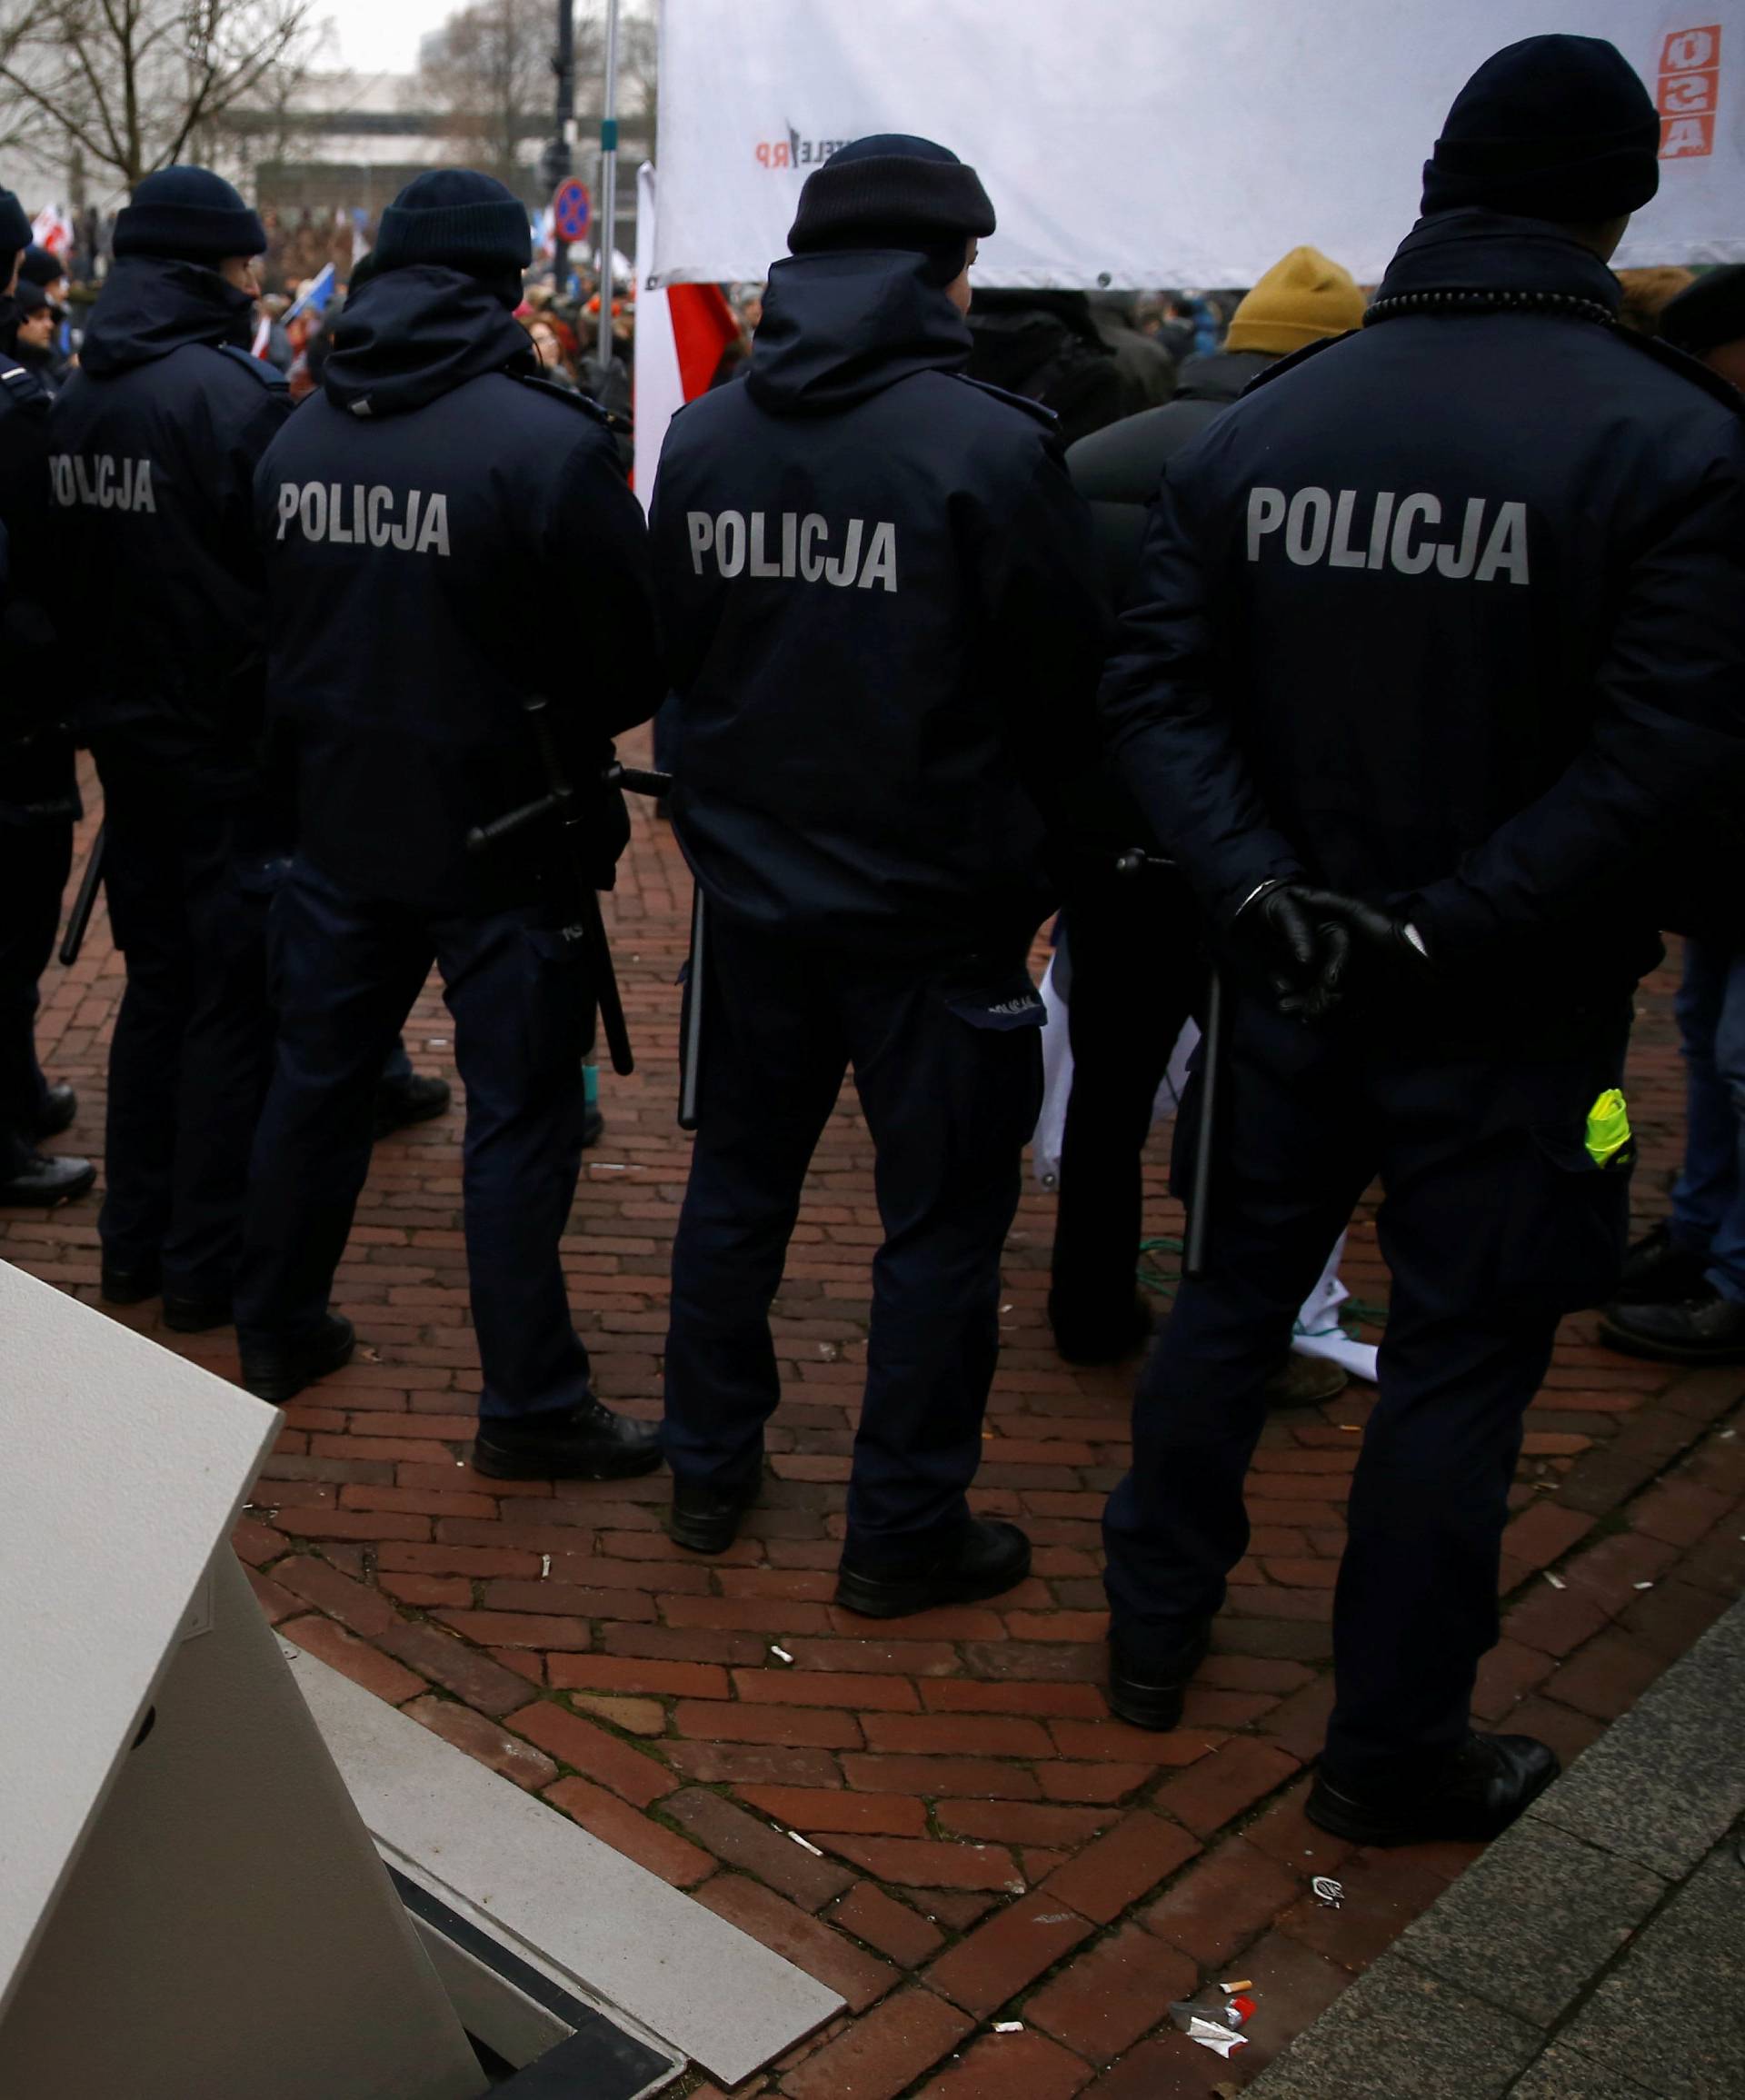 Police block access to the Parliament building during a protest in Warsaw